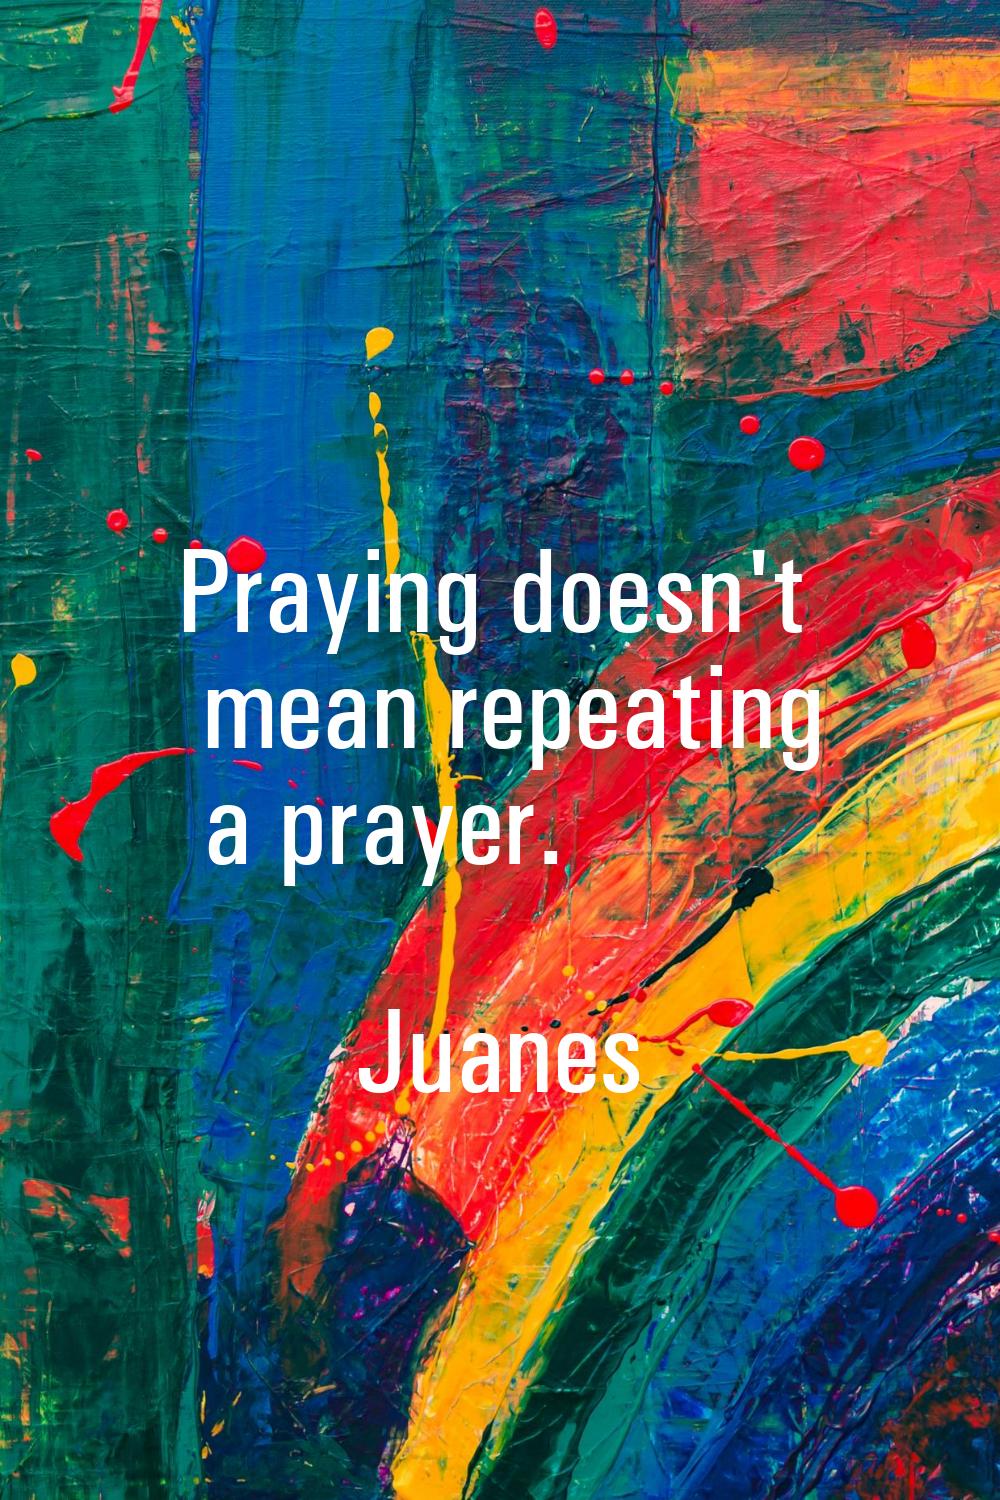 Praying doesn't mean repeating a prayer.